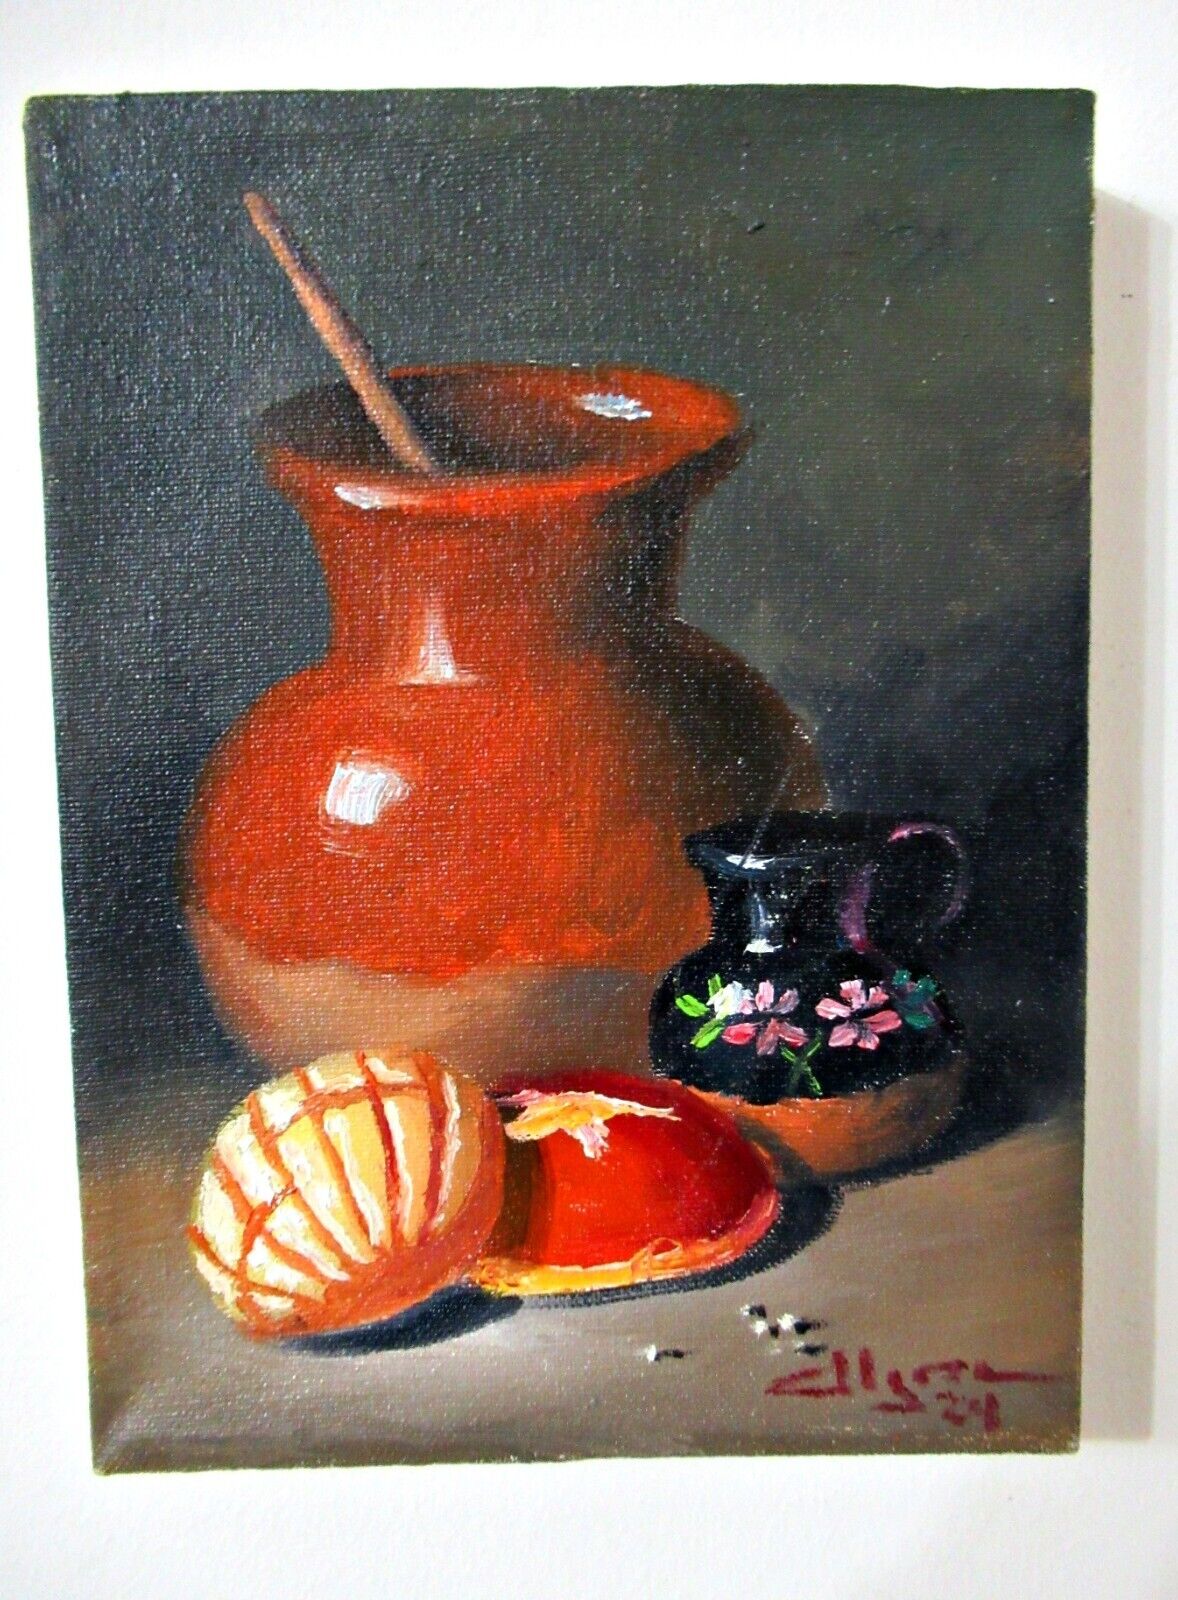 PUEBLA MEXICO OIL ON CANVAS PAINTING STILL LIFE W/ PAN DULCE  8